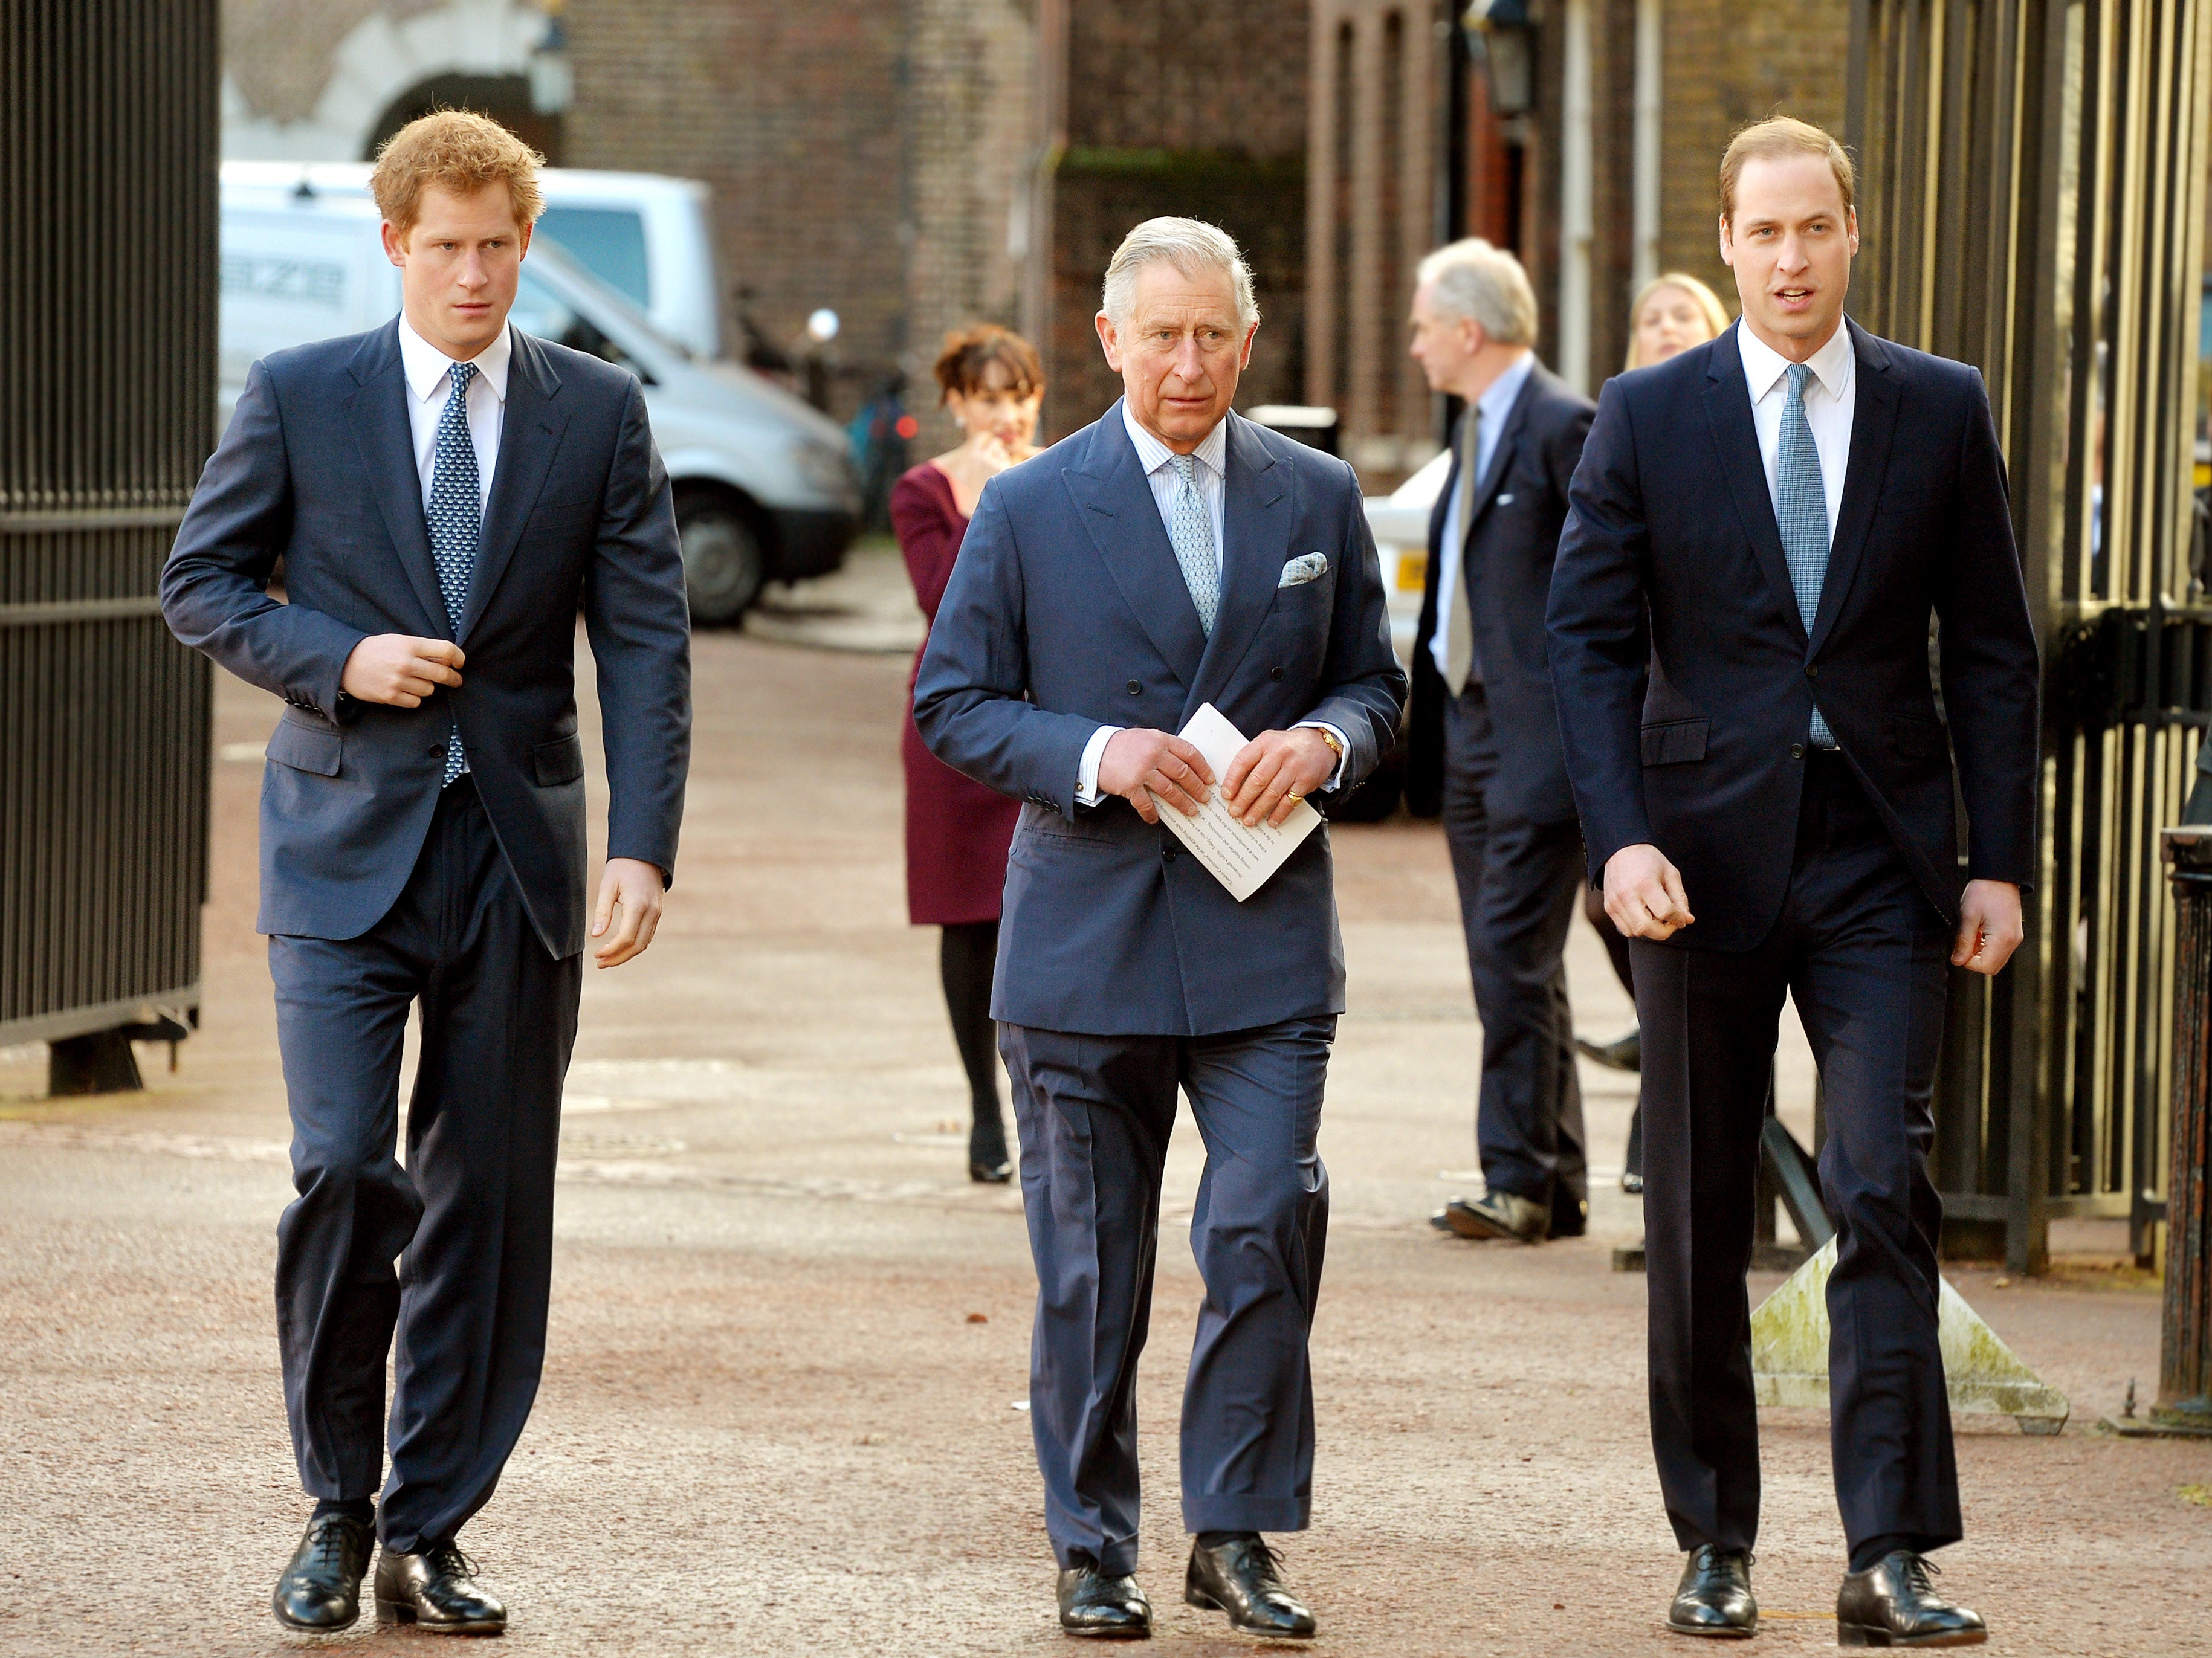 william competes with charles and is desperate to run the royal family, scobie book claims